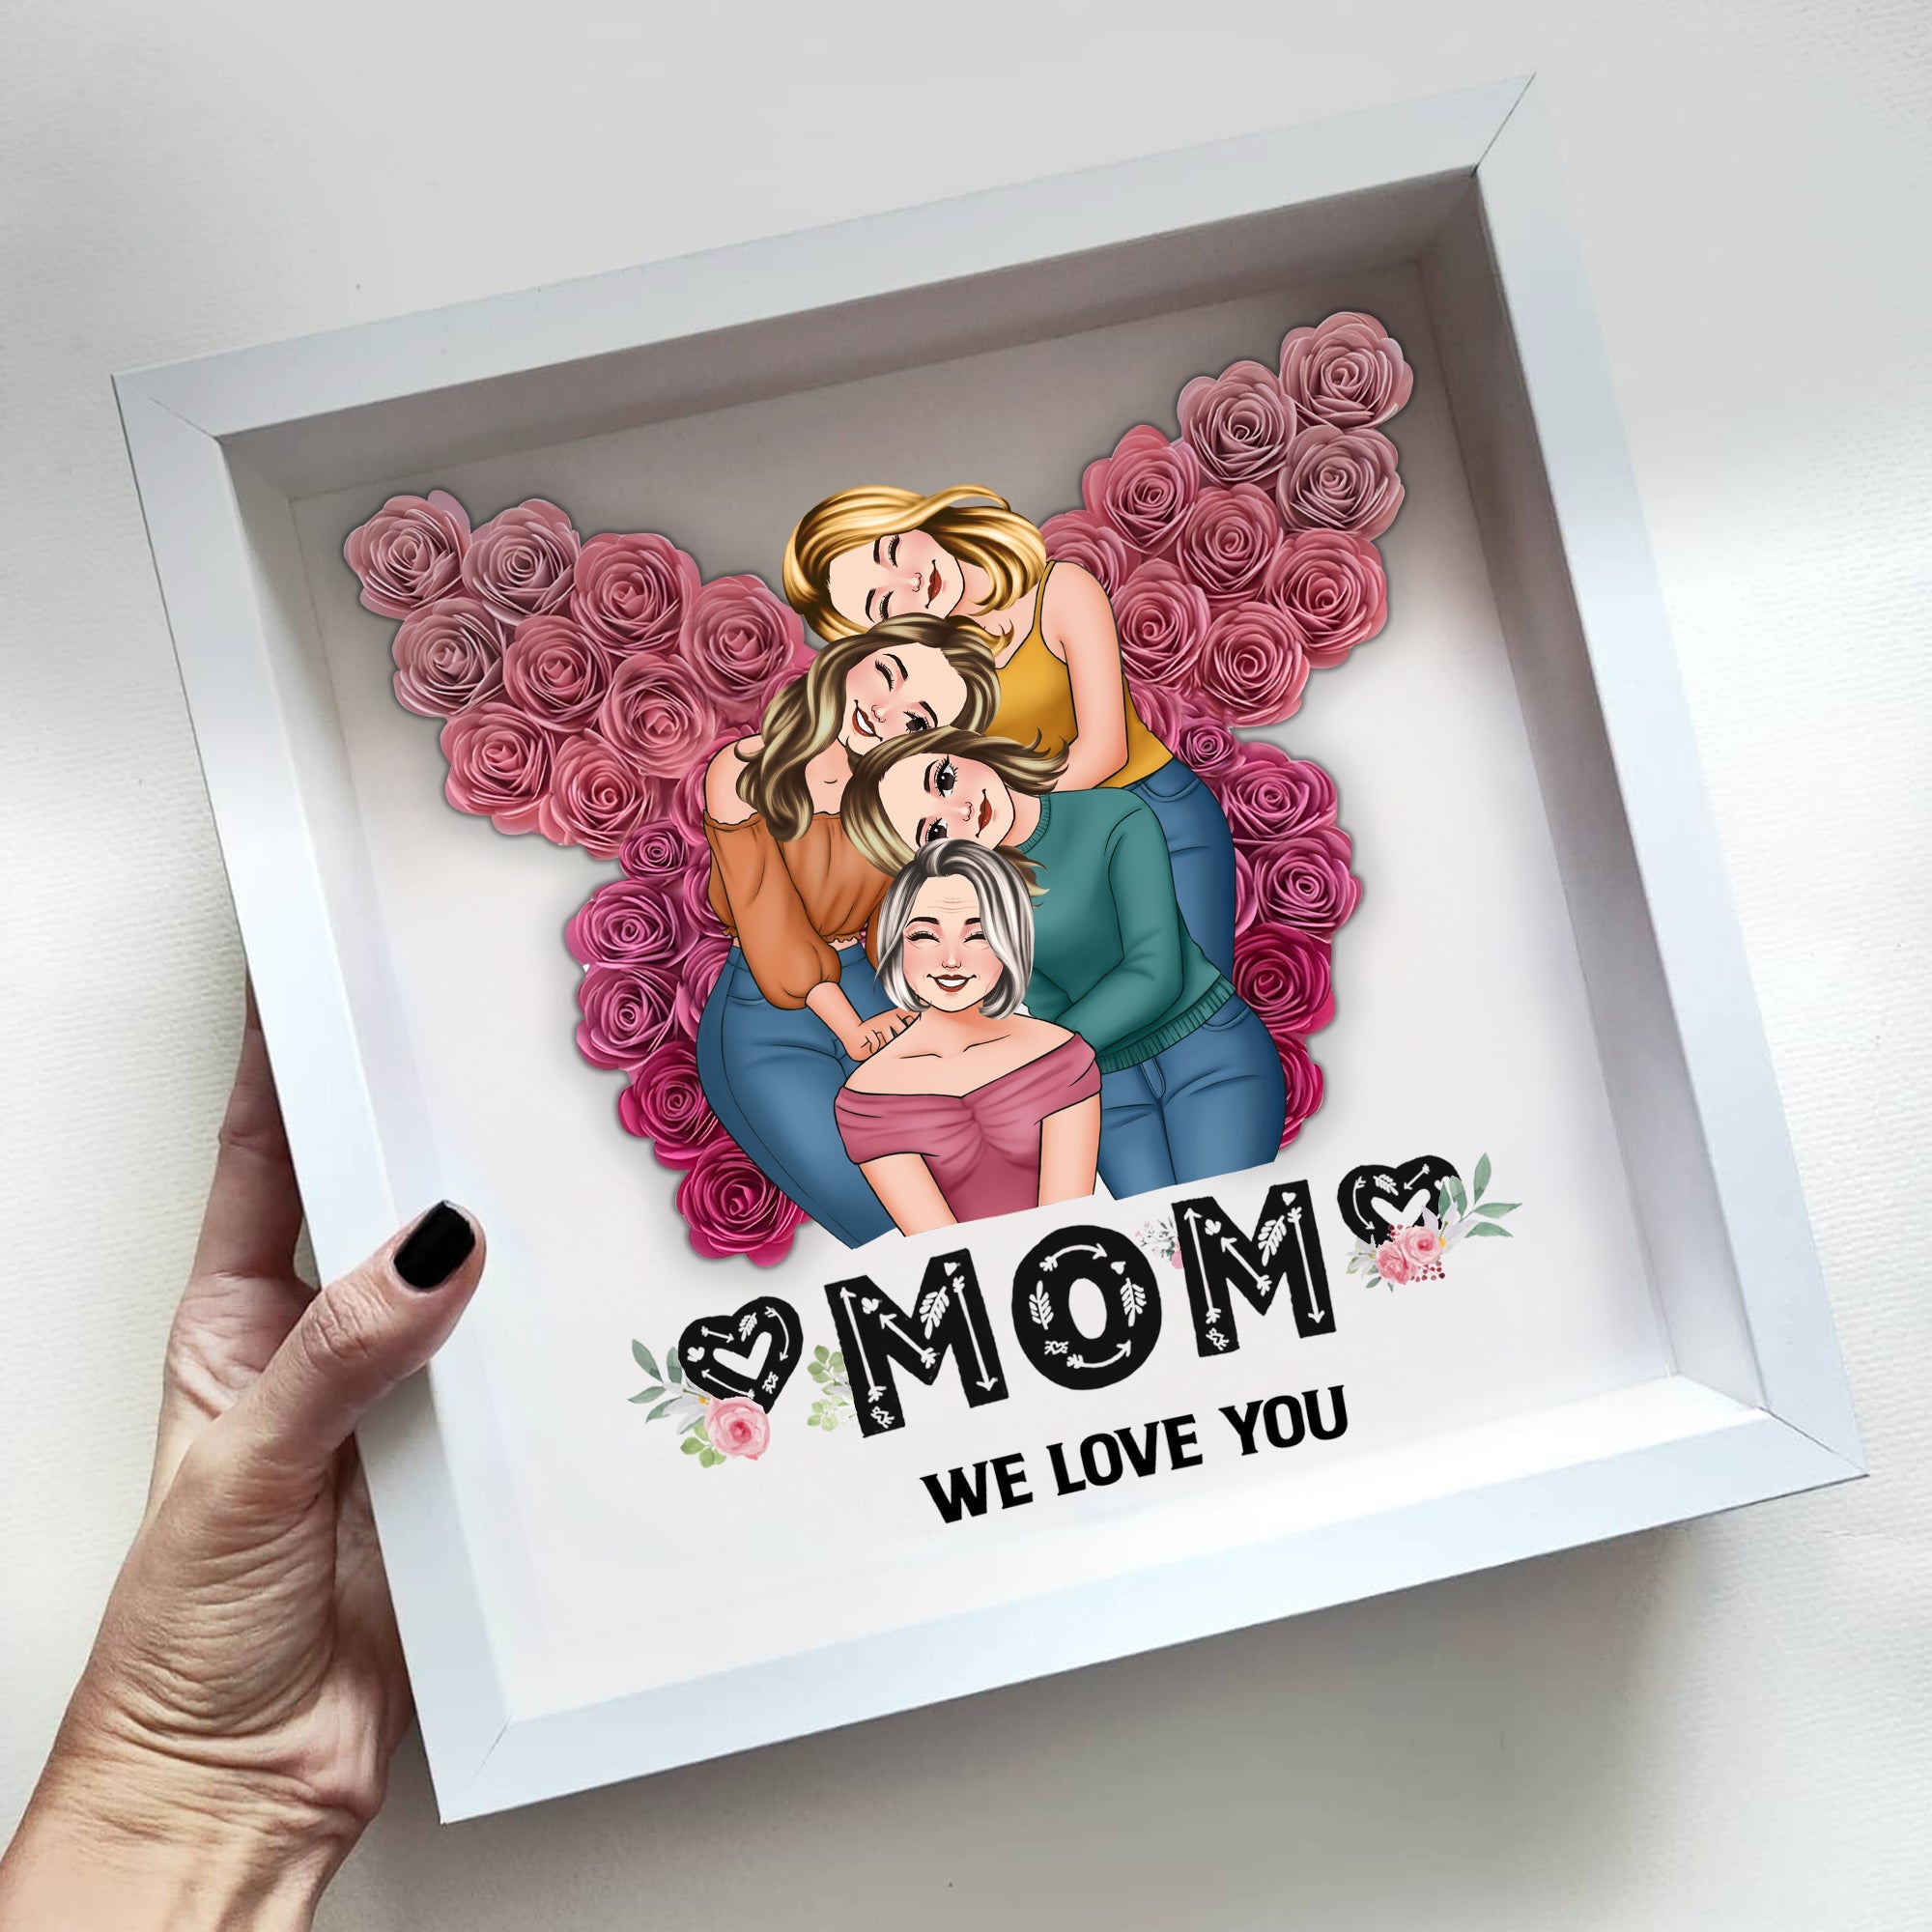 Mom We Love You Butterfly - Personalized Mother Custom Shaped Flower Shadow Box